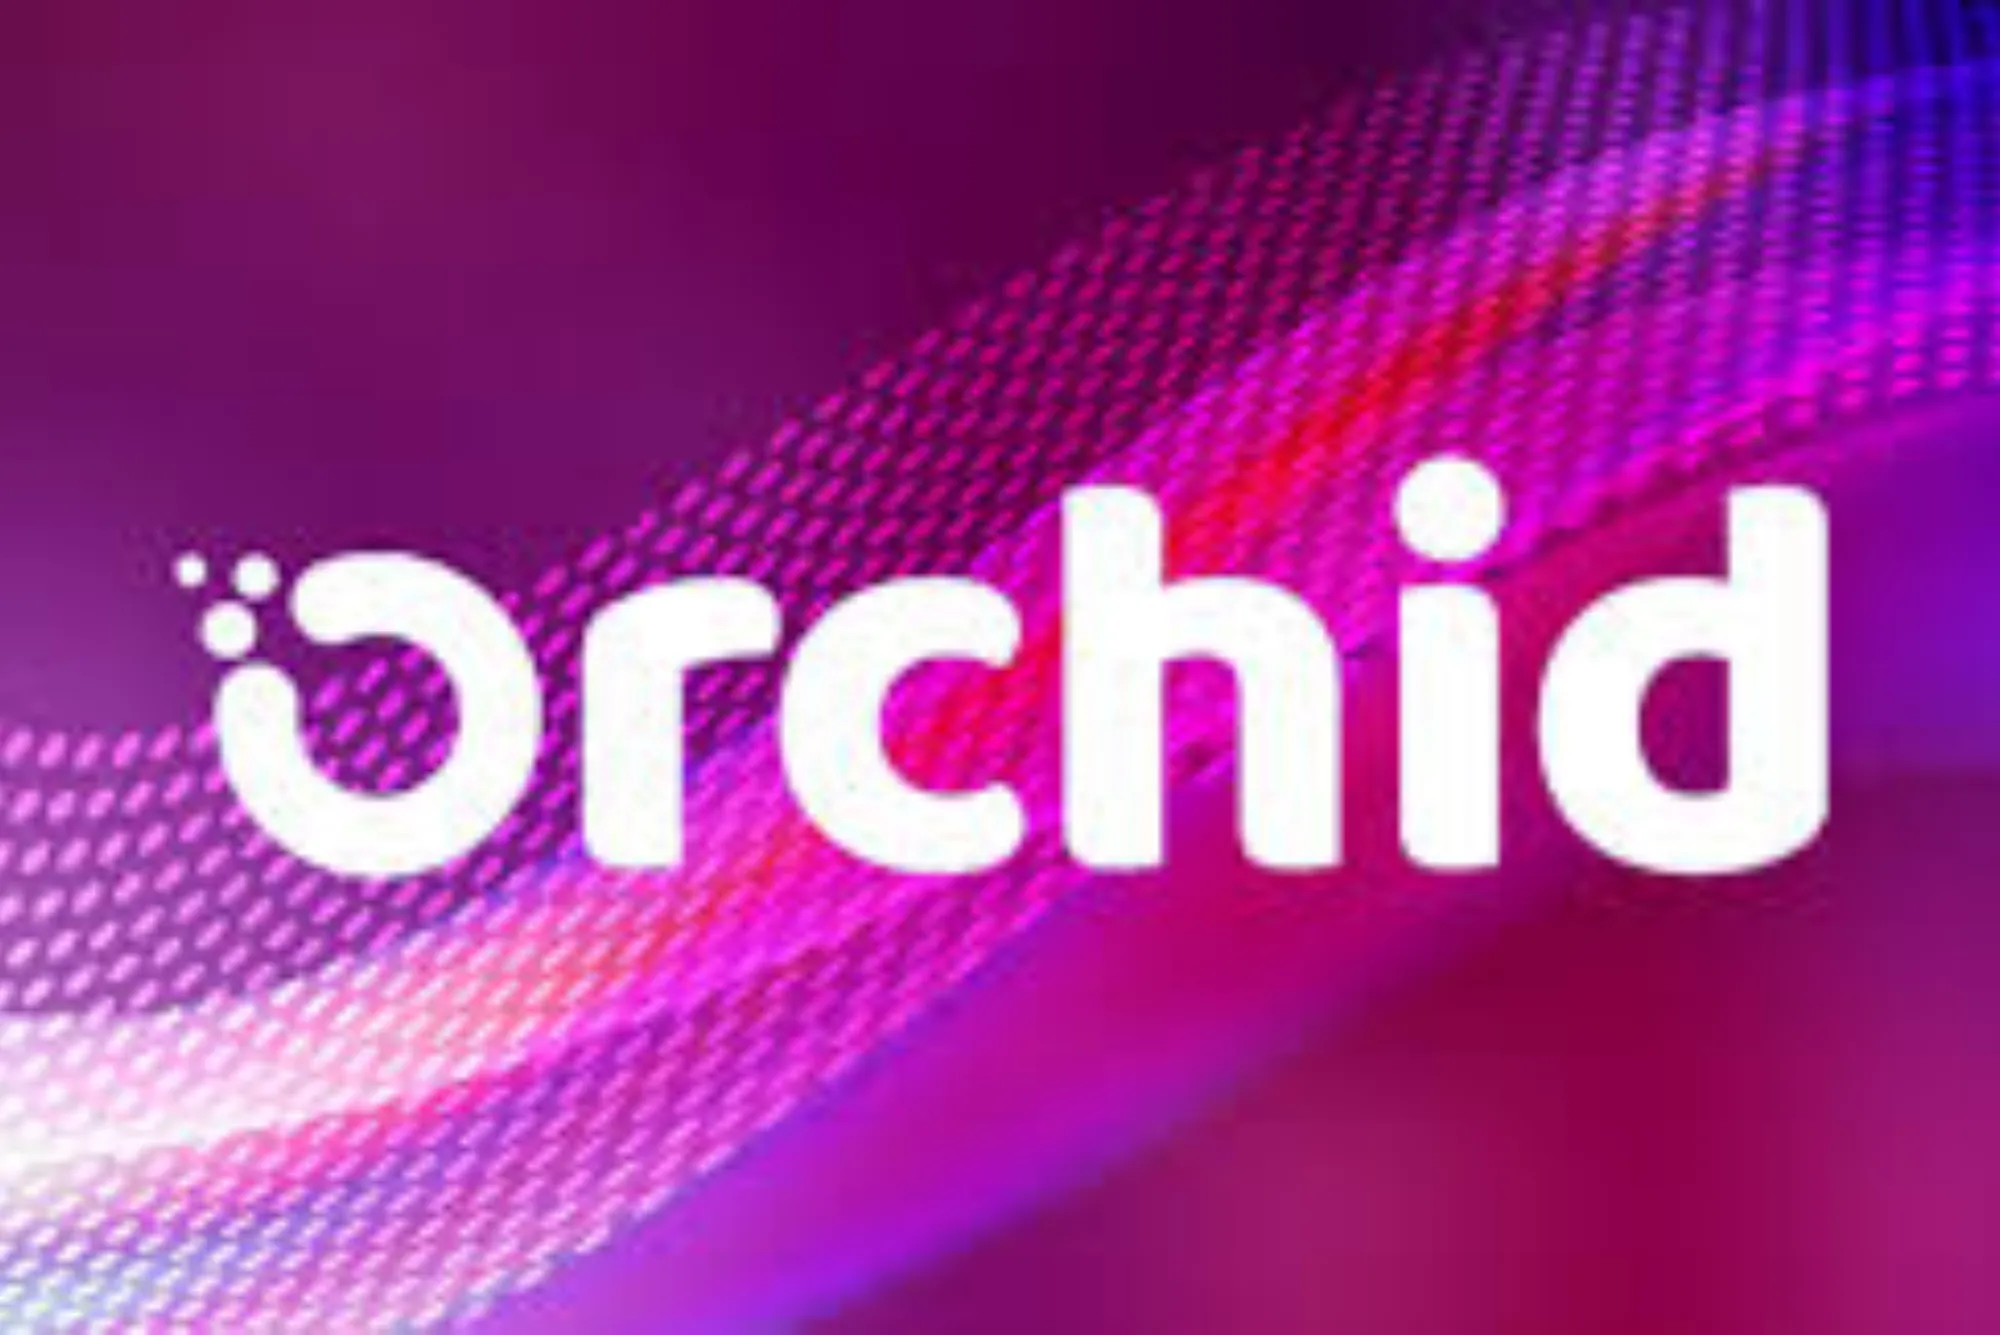  Orchid Cryptocurrency